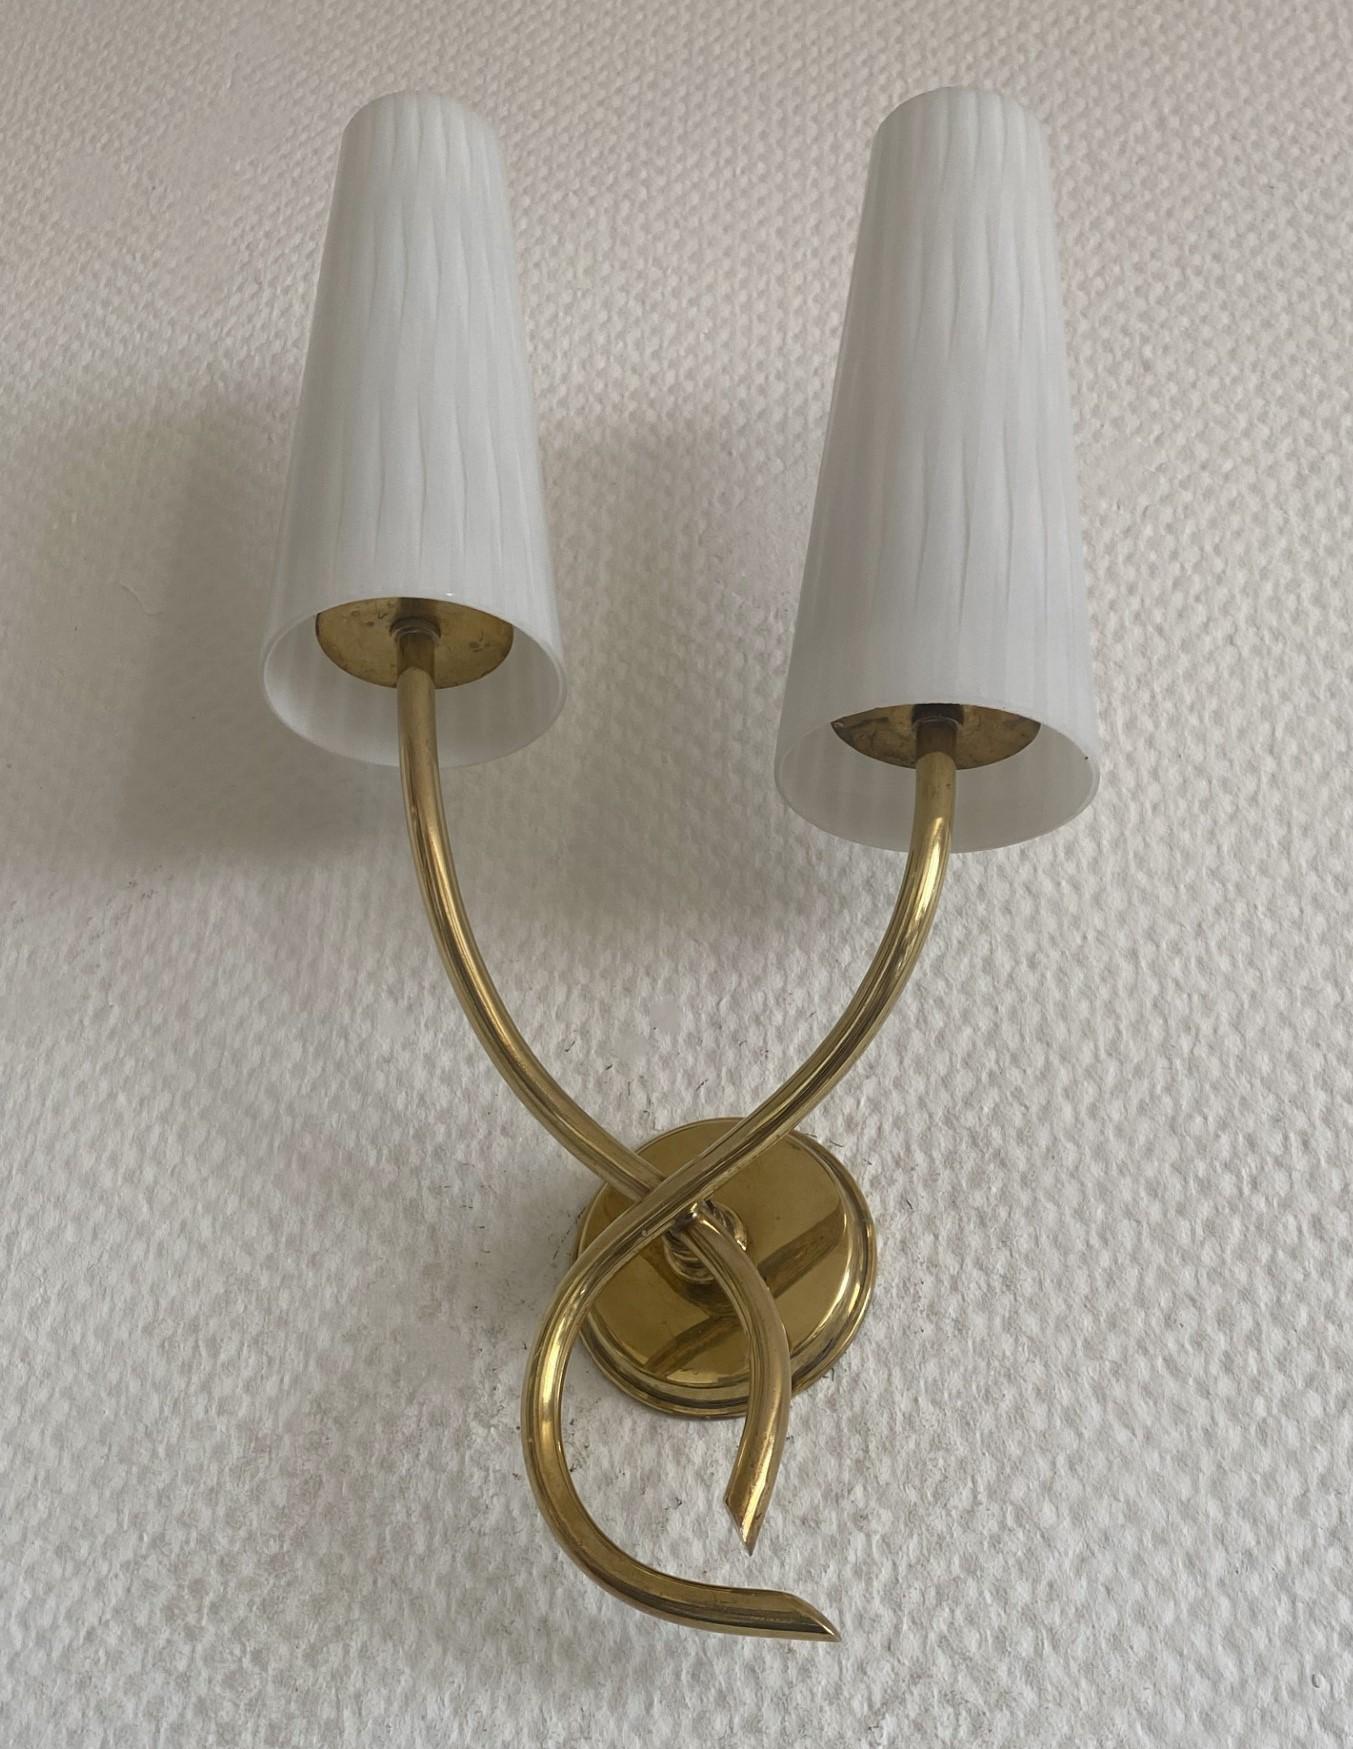 Pair of French Maison Lunel Brass Opal Glass Two-Light Wall Sconces, 1950s For Sale 5